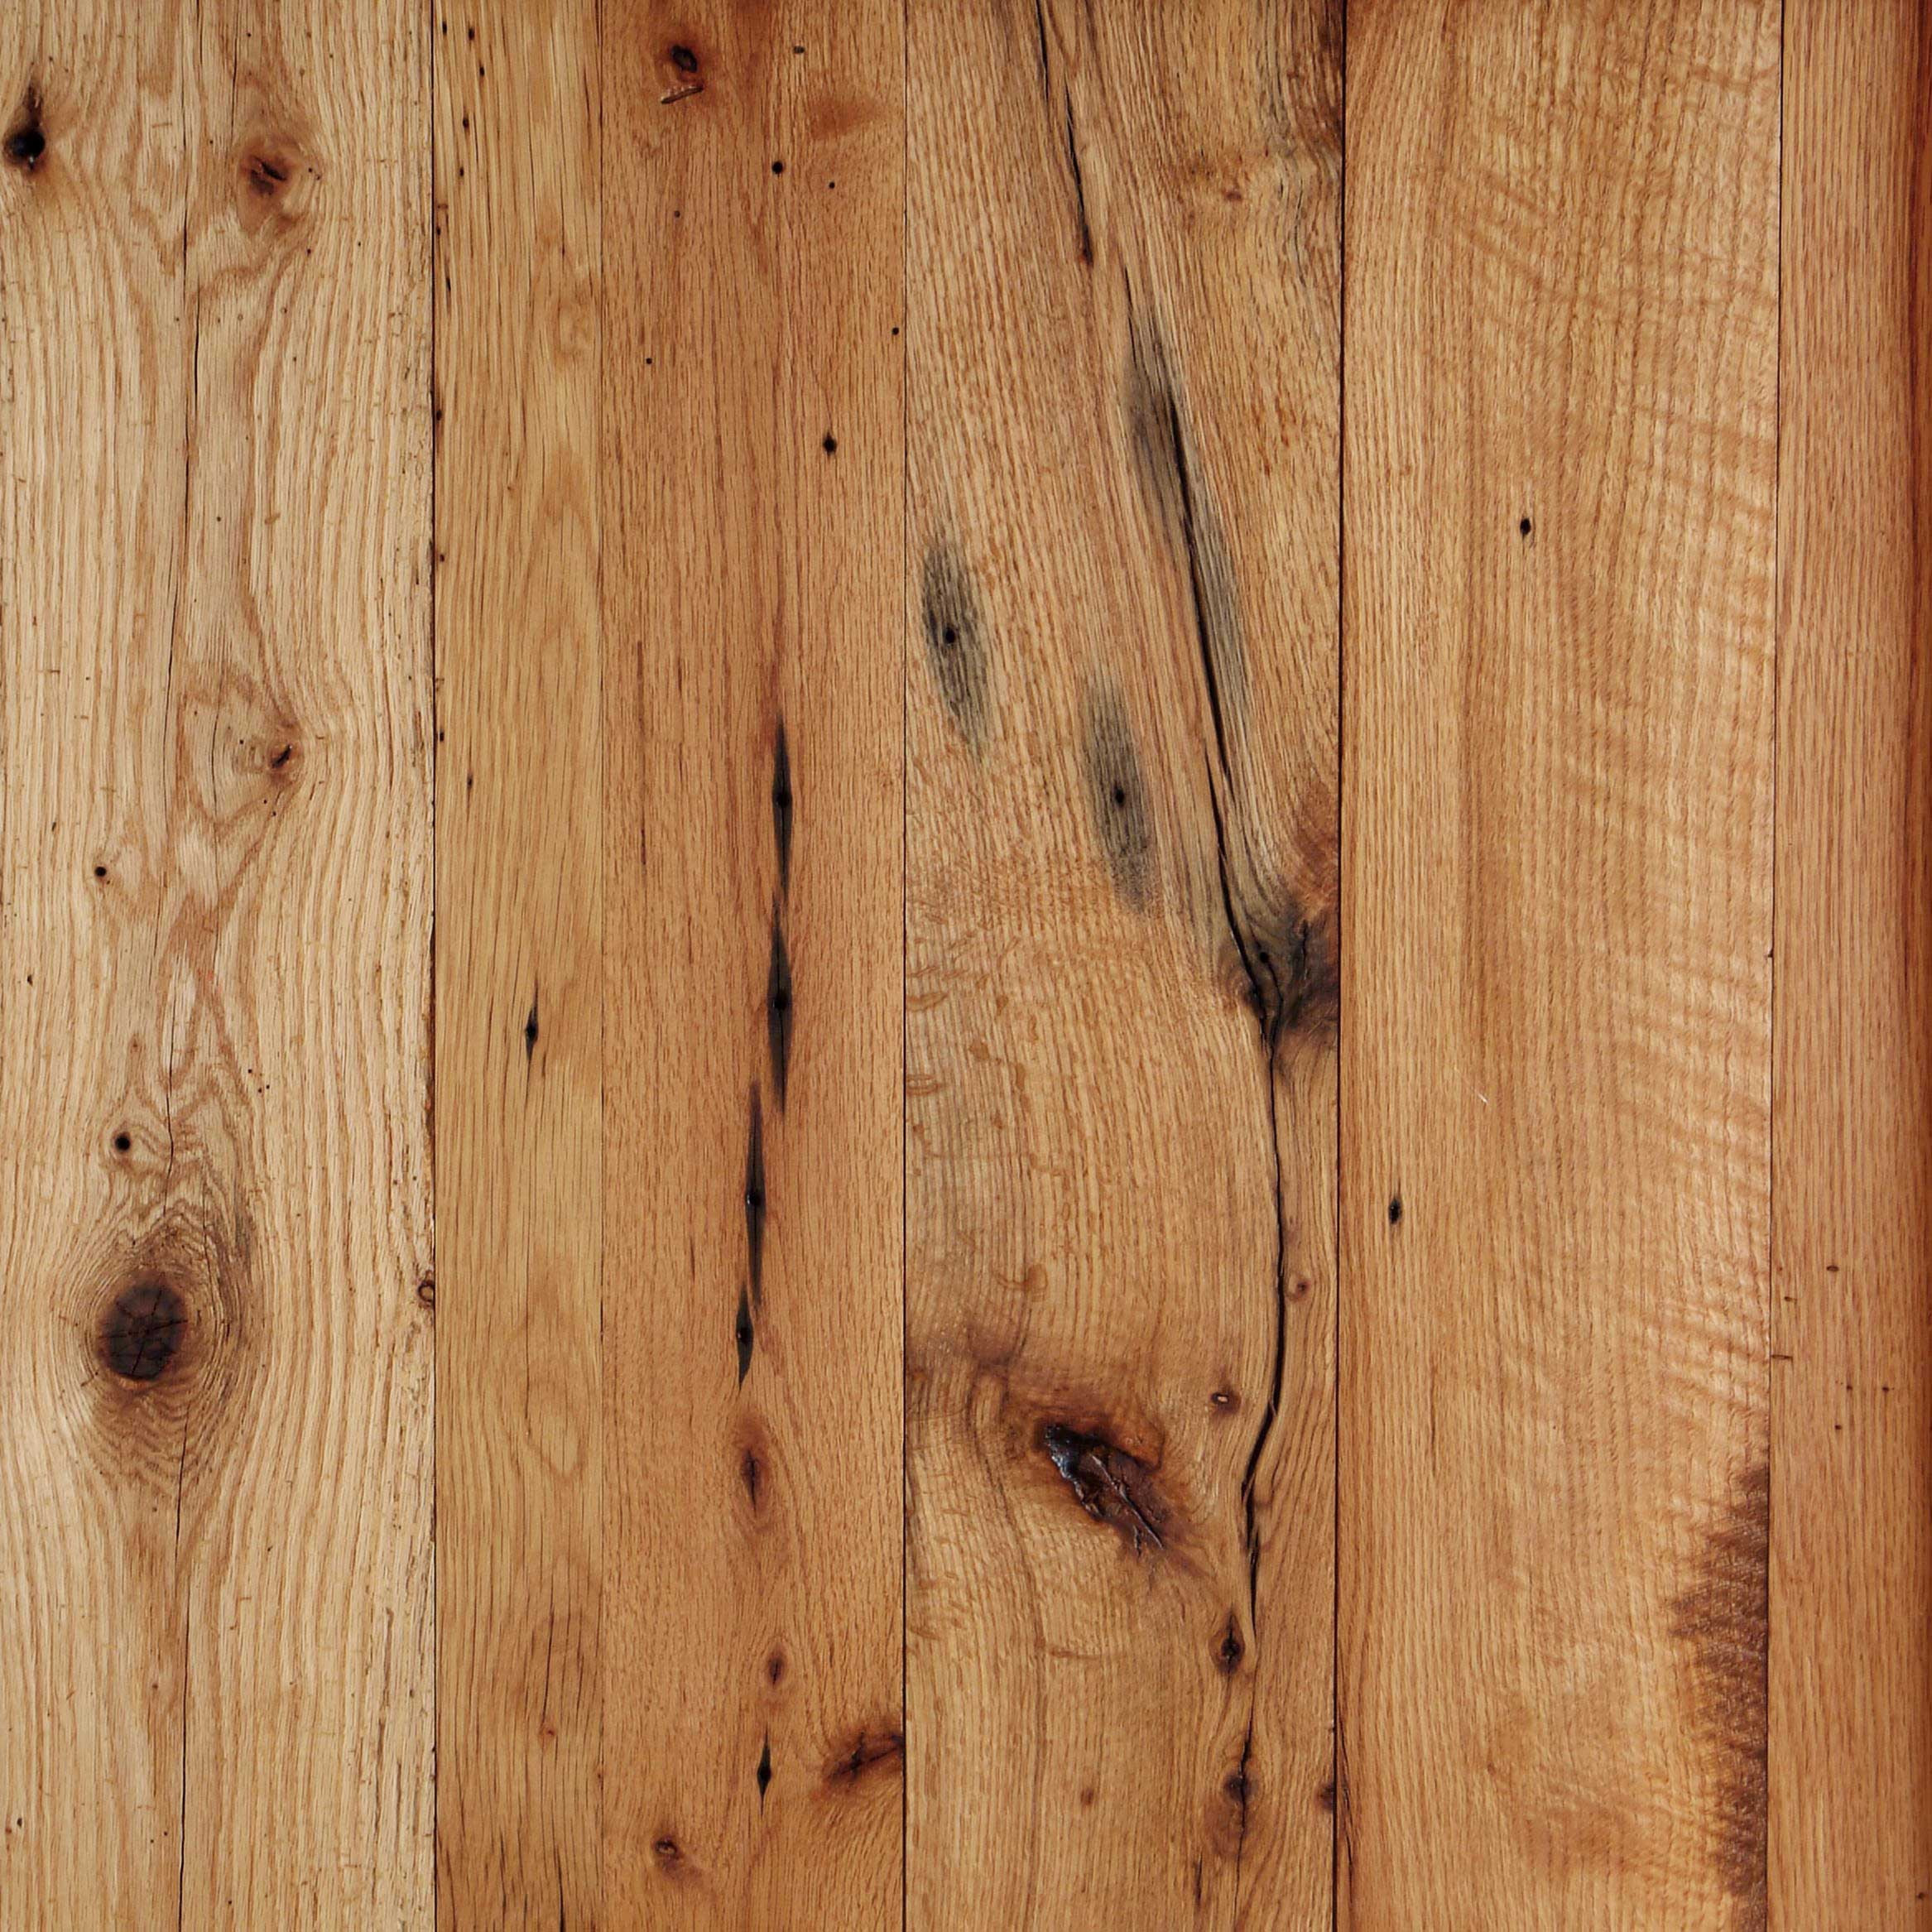 4 inch hardwood flooring of longleaf lumber reclaimed red white oak wood within reclaimed salvaged antique red oak flooring wide boards knots